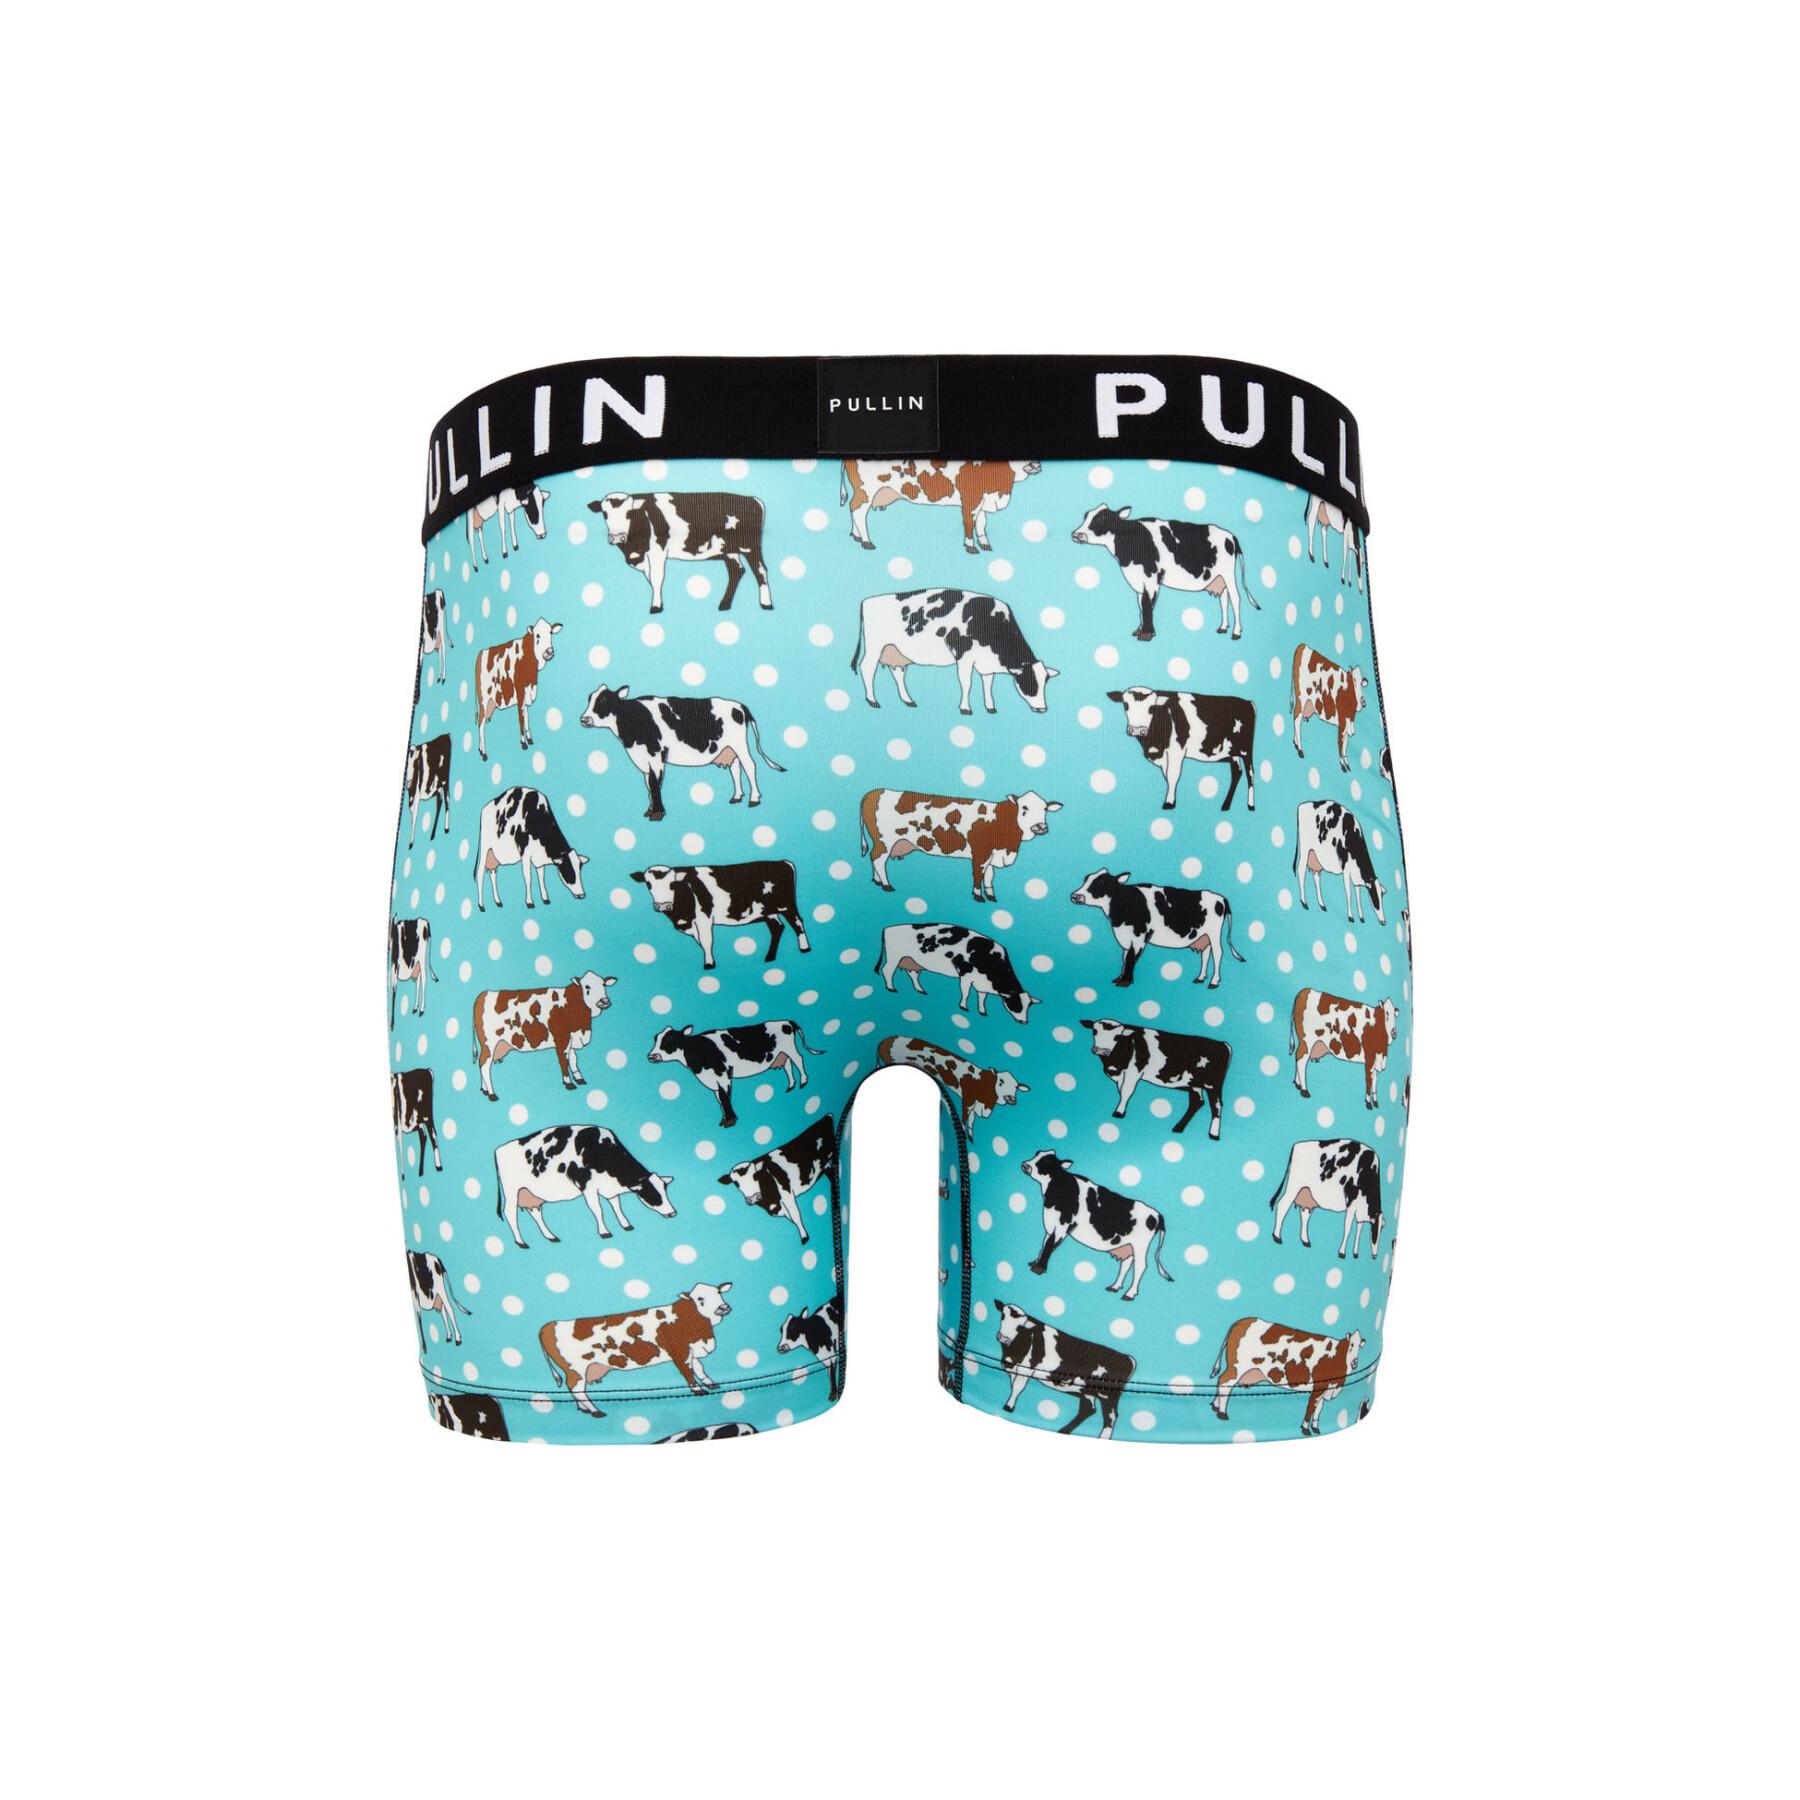 Boxer Pull-in Fashion 2 Meuh